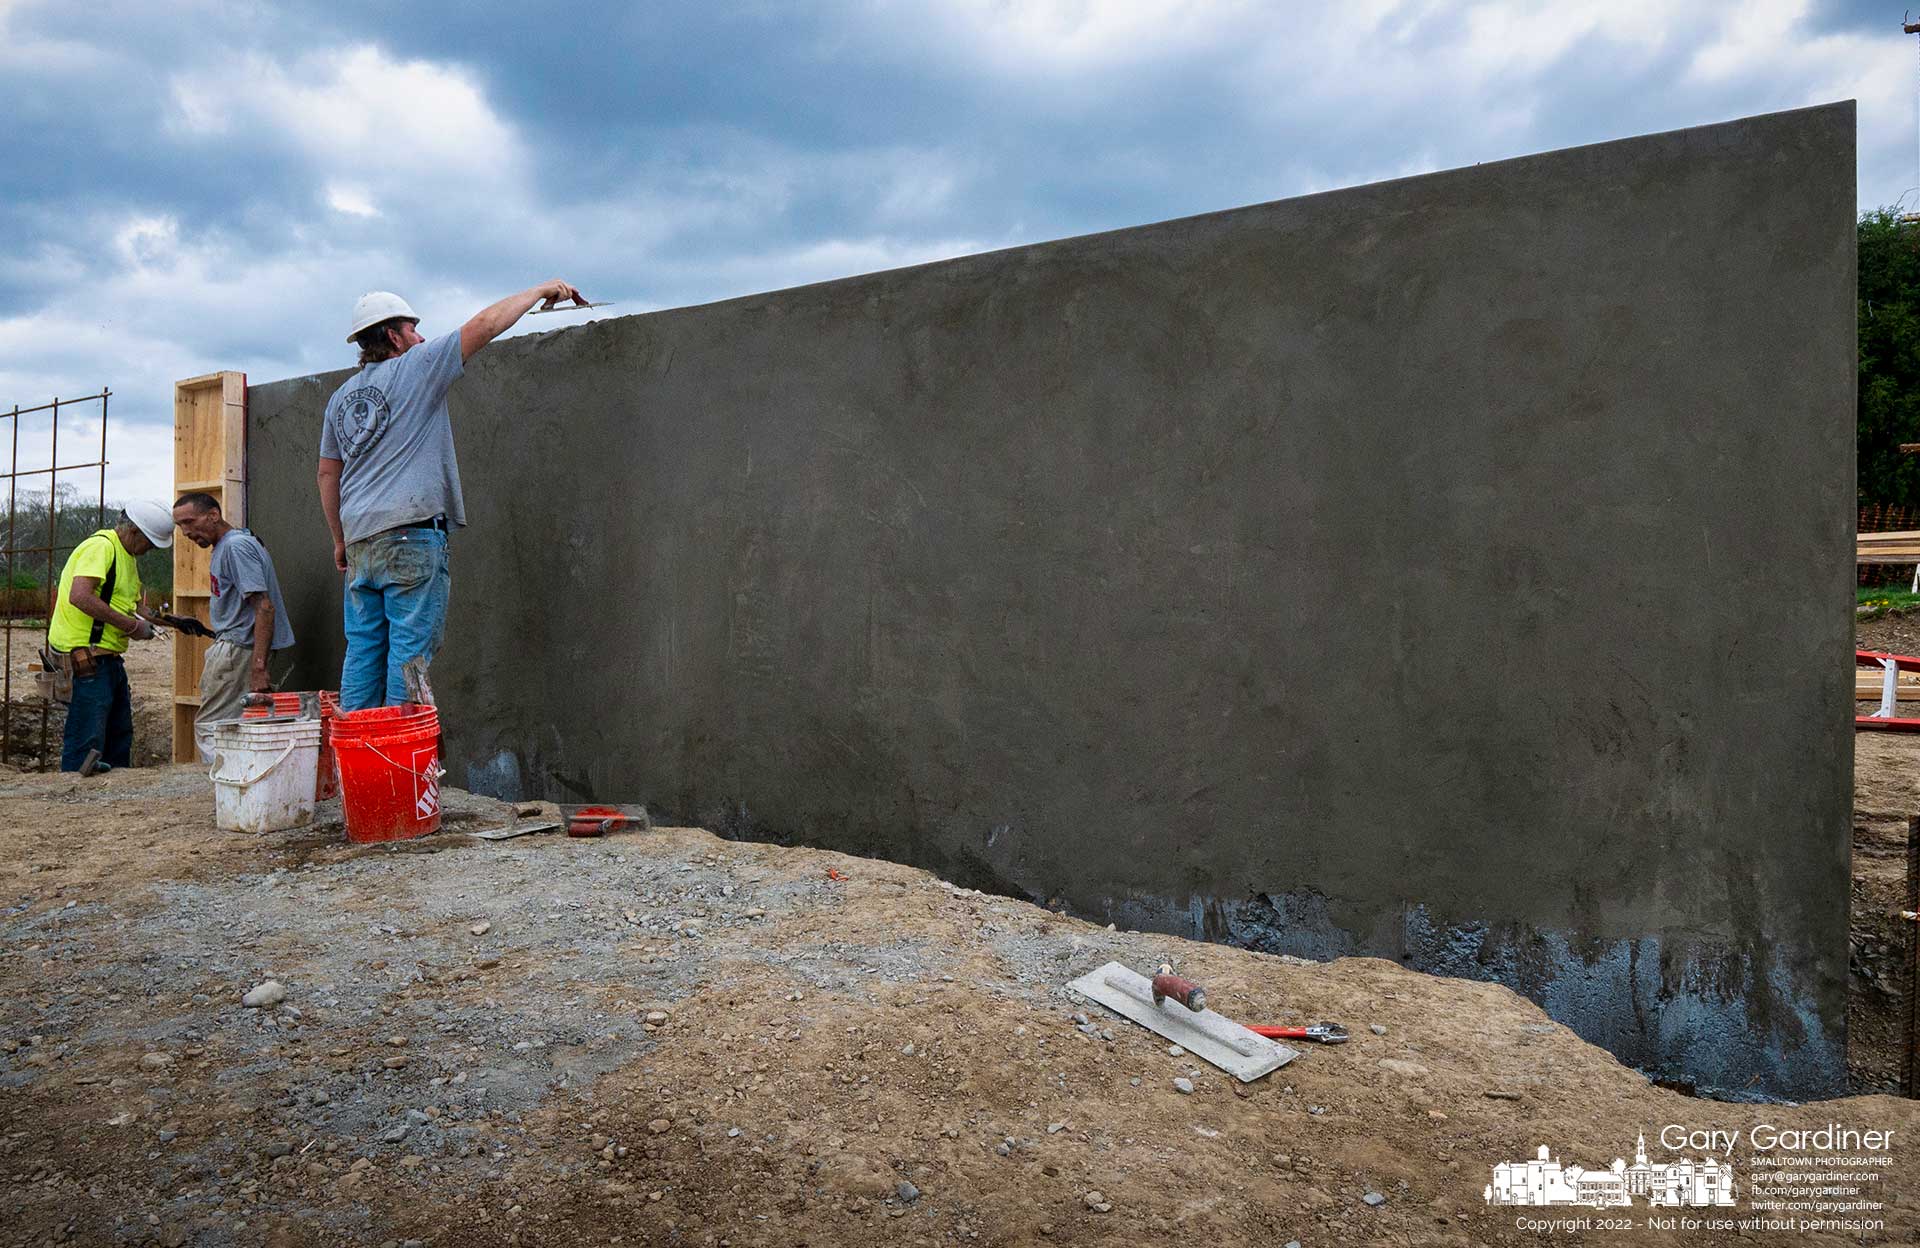 A worker applies stucco to a concrete poured wall, one of the first sections built for the Veterans Memorial at the Westerville Sports field across from the Community Center. My Final Photo for April 25, 2022.